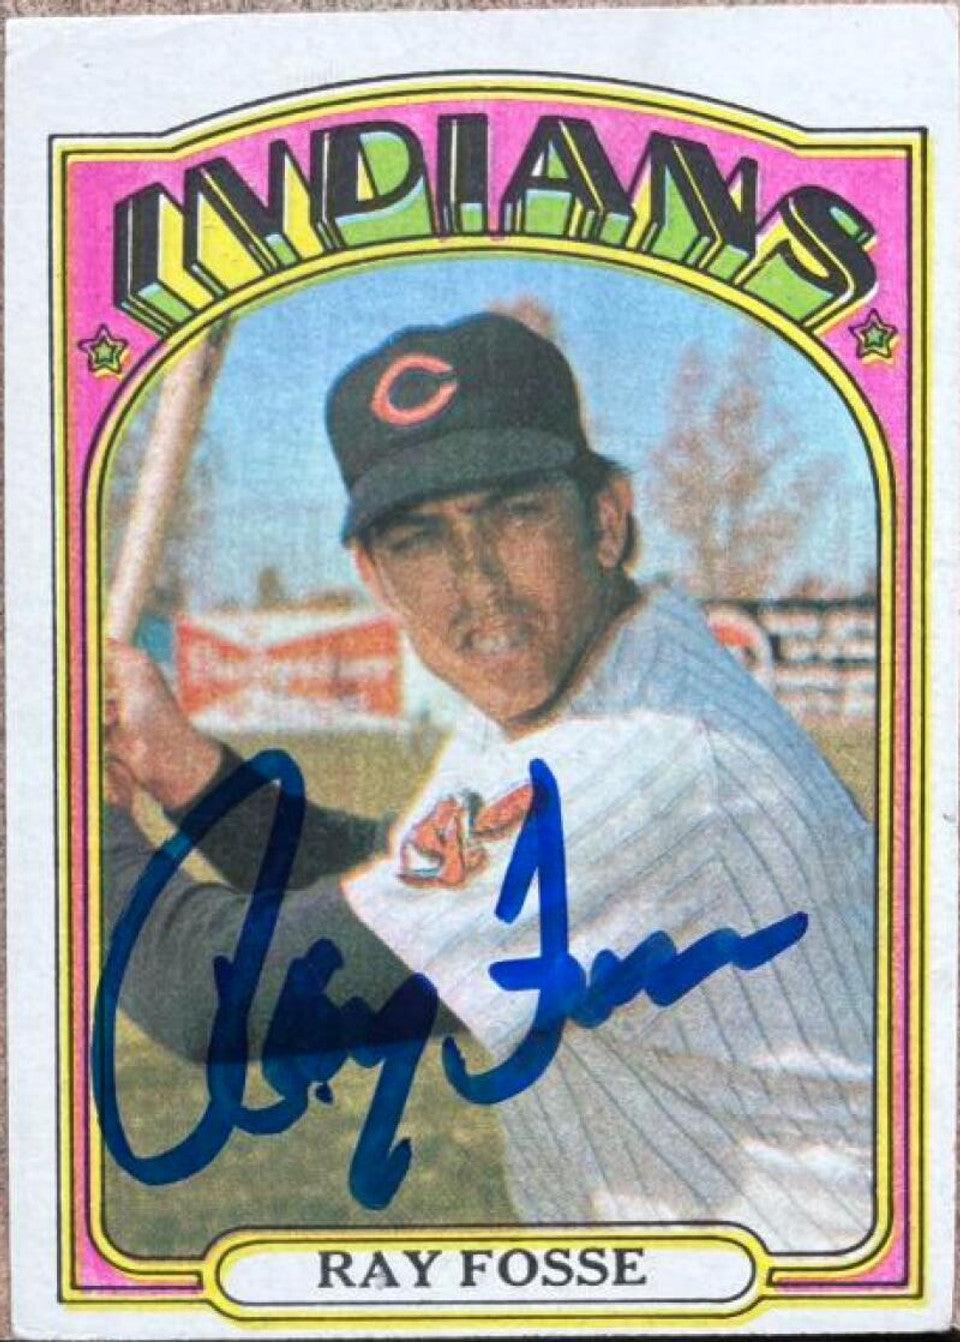 Ray Fosse Signed 1972 Topps Baseball Card - Cleveland Indians - PastPros